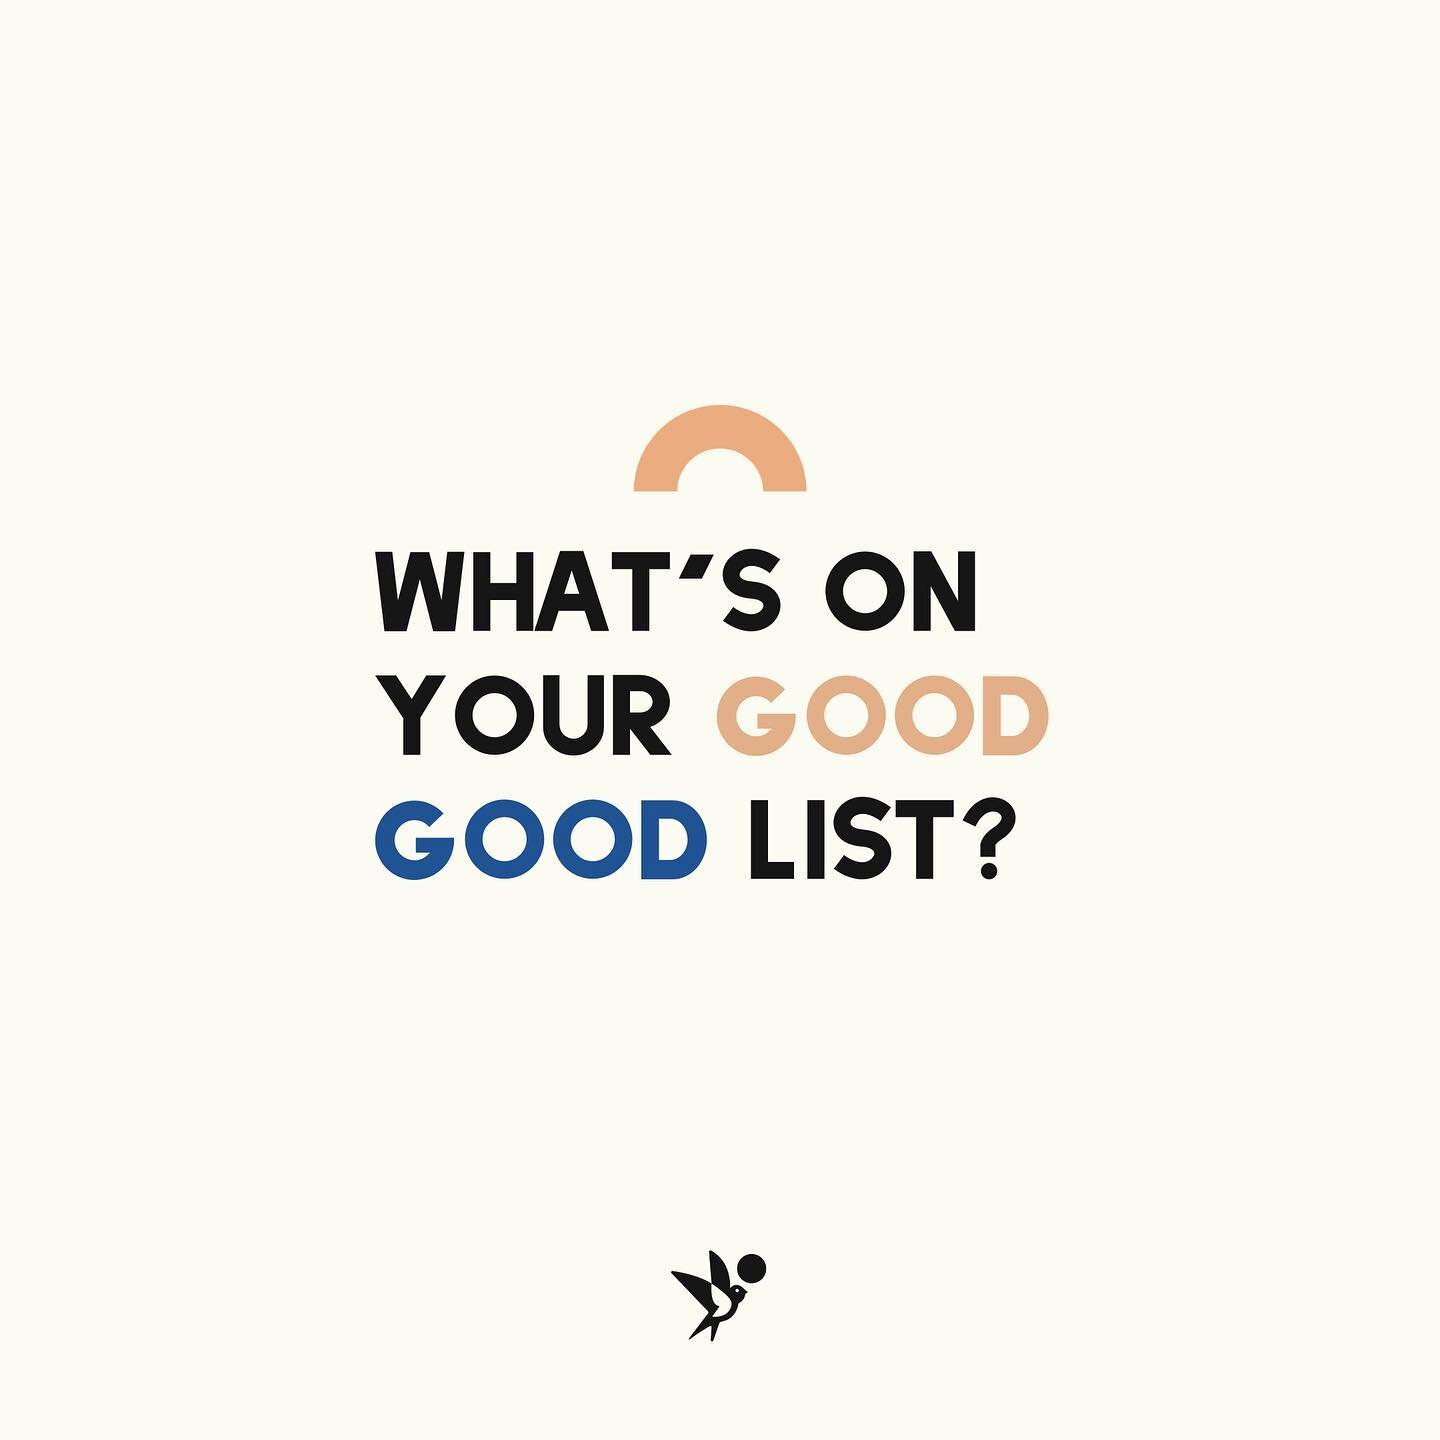 I can&rsquo;t remember when I first heard this term&mdash;it could have been a past therapist&mdash;but it stuck with me! A good good list (you could name it whatever) is a compilation of things that predictably make you happy/feel good/reduce overwh